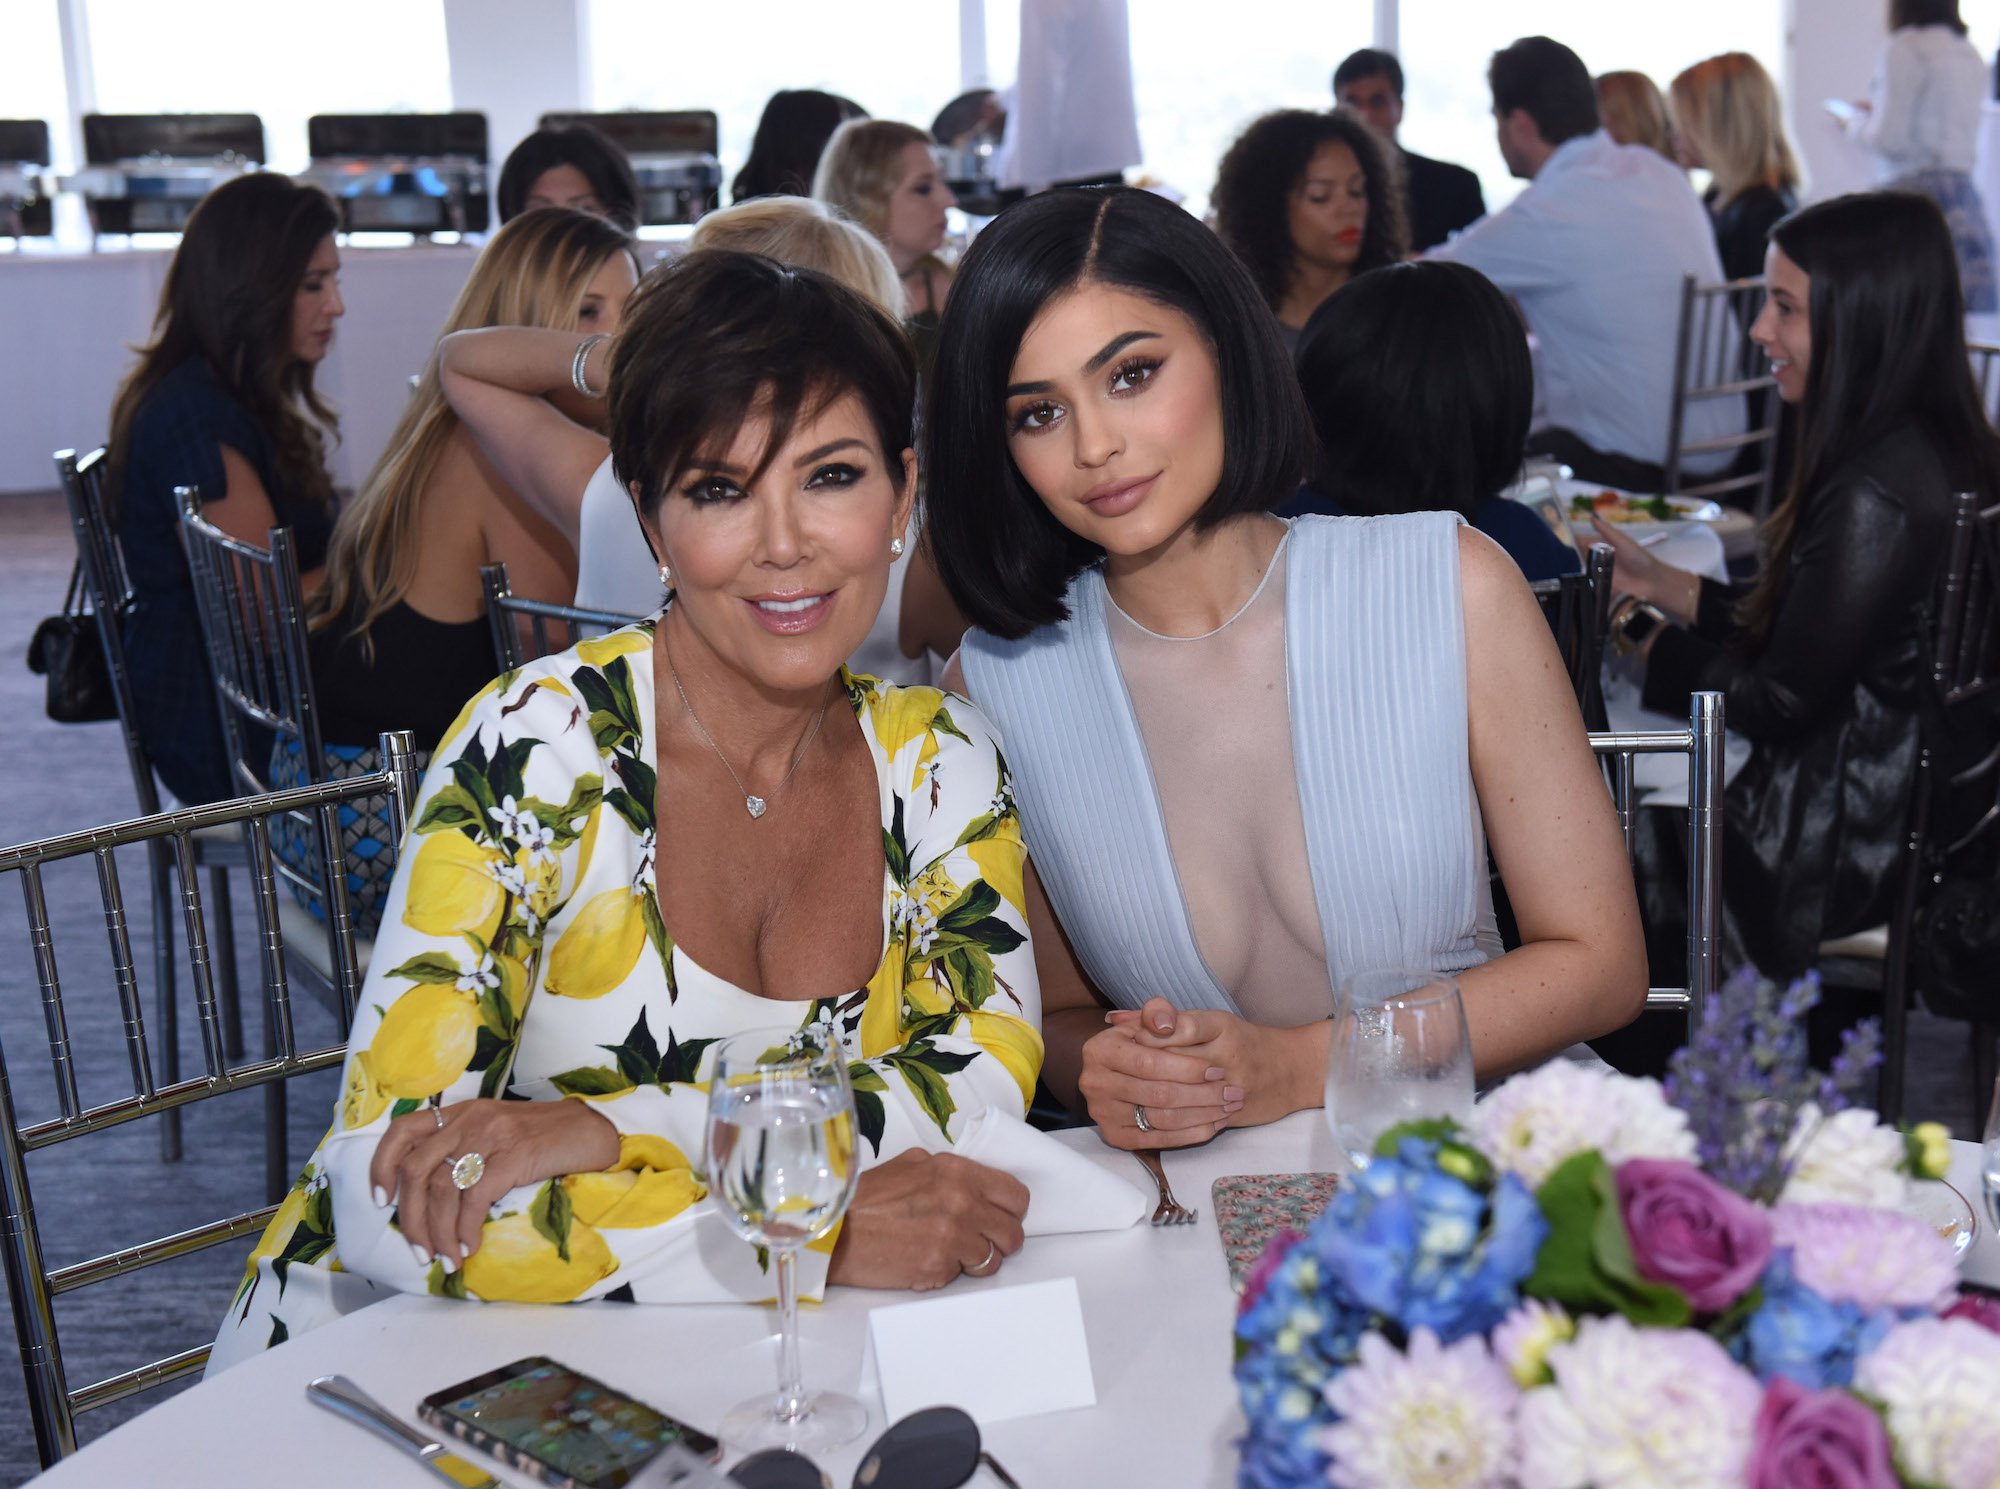 Kylie Jenner Fans Can’t Figure Out Why She Keeps a $200,000 Wax Figure of Her Mom